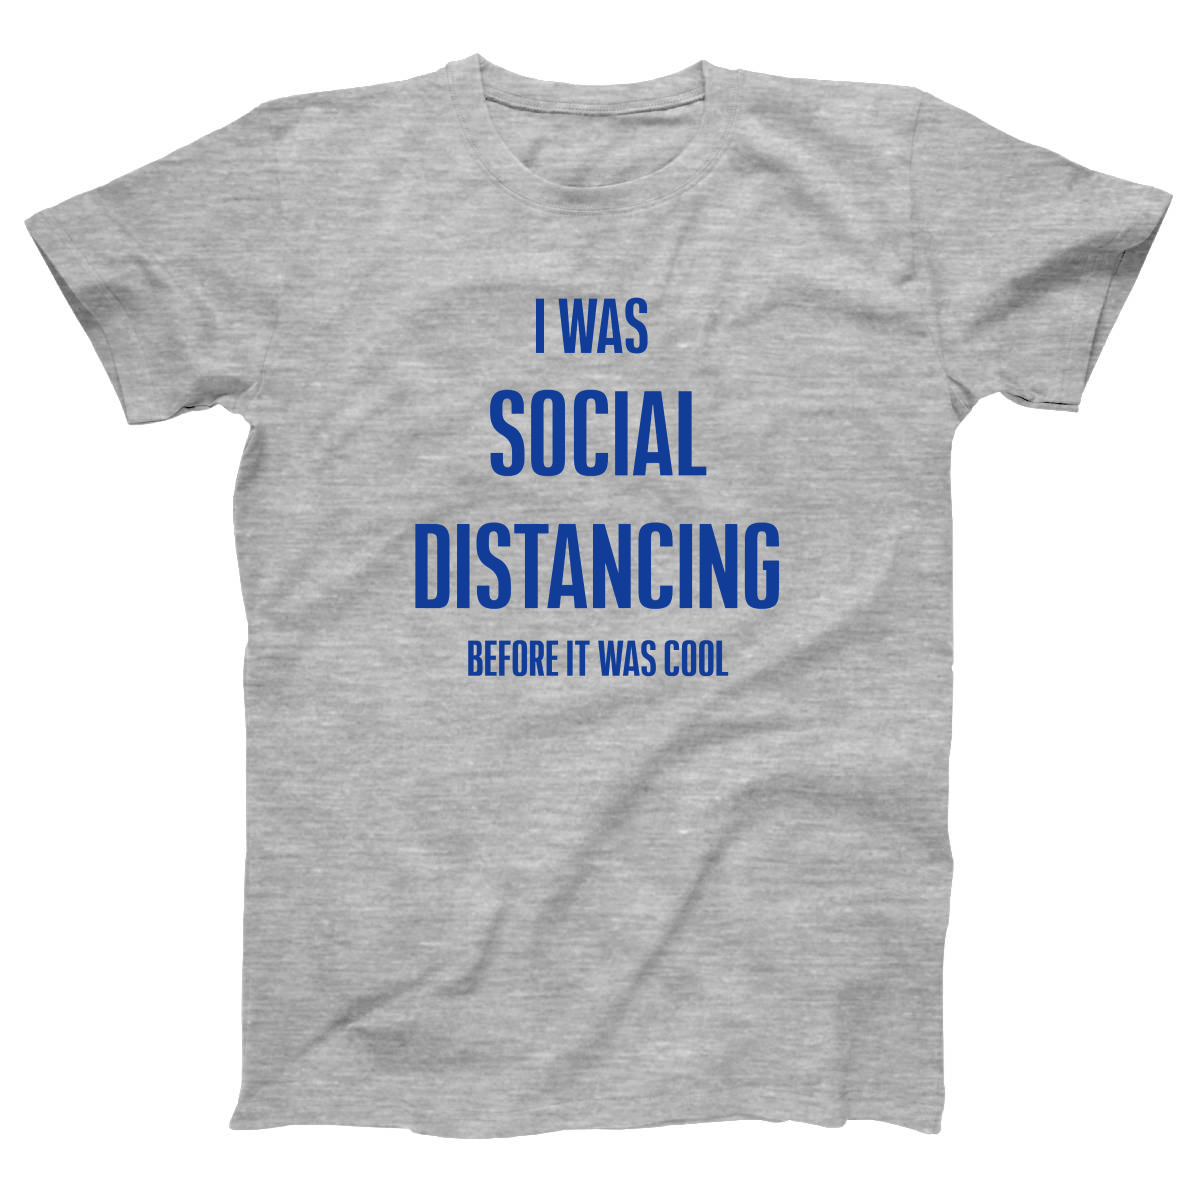 I was social distancing before it was cool Women's T-shirt | Gray